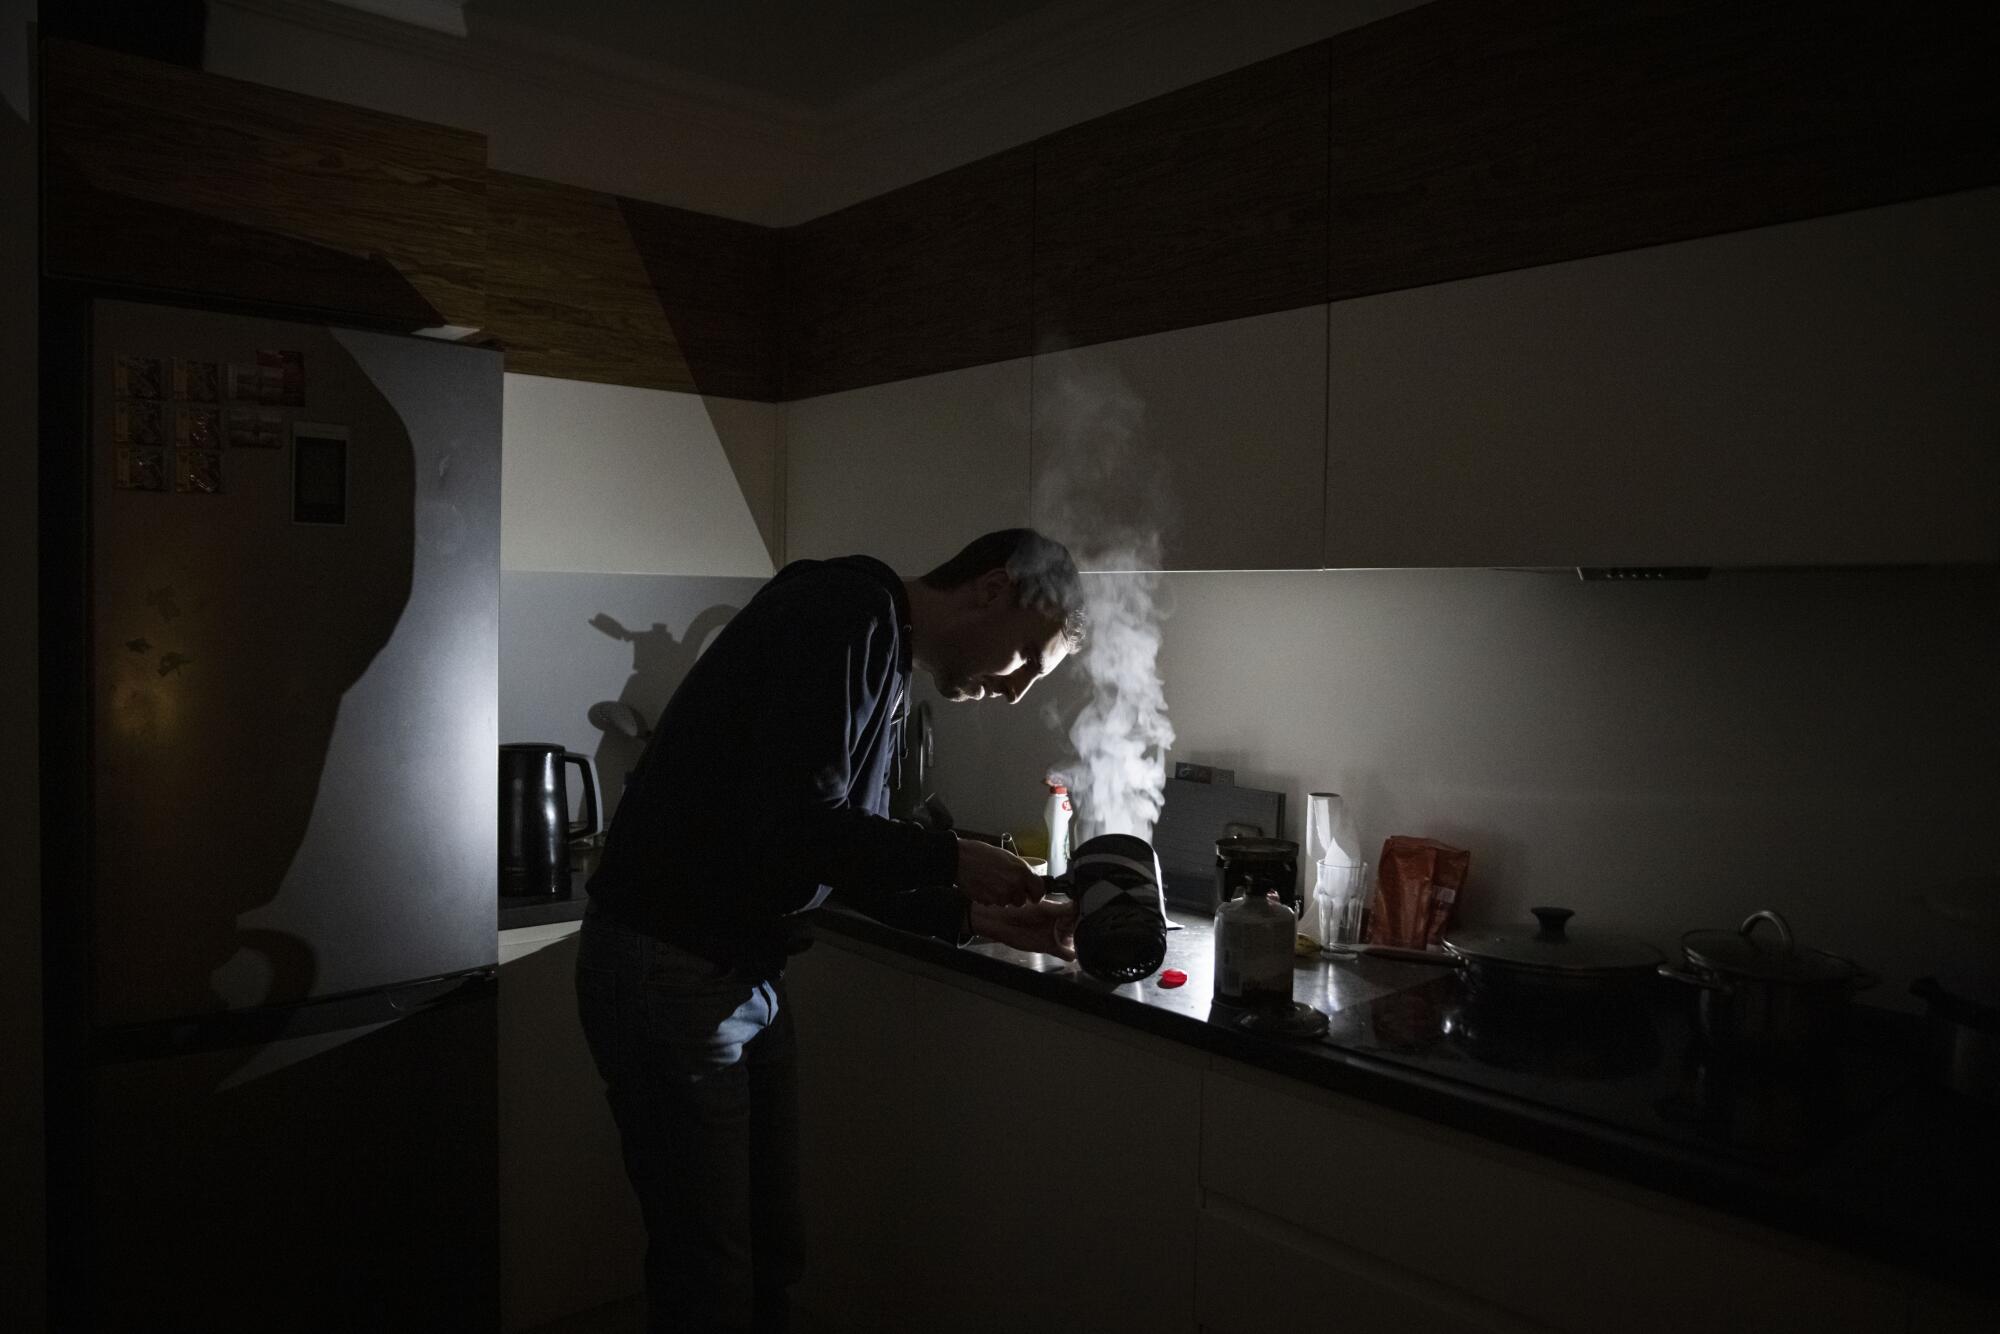 A man makes tea on a camping stove in a dark kitchen.